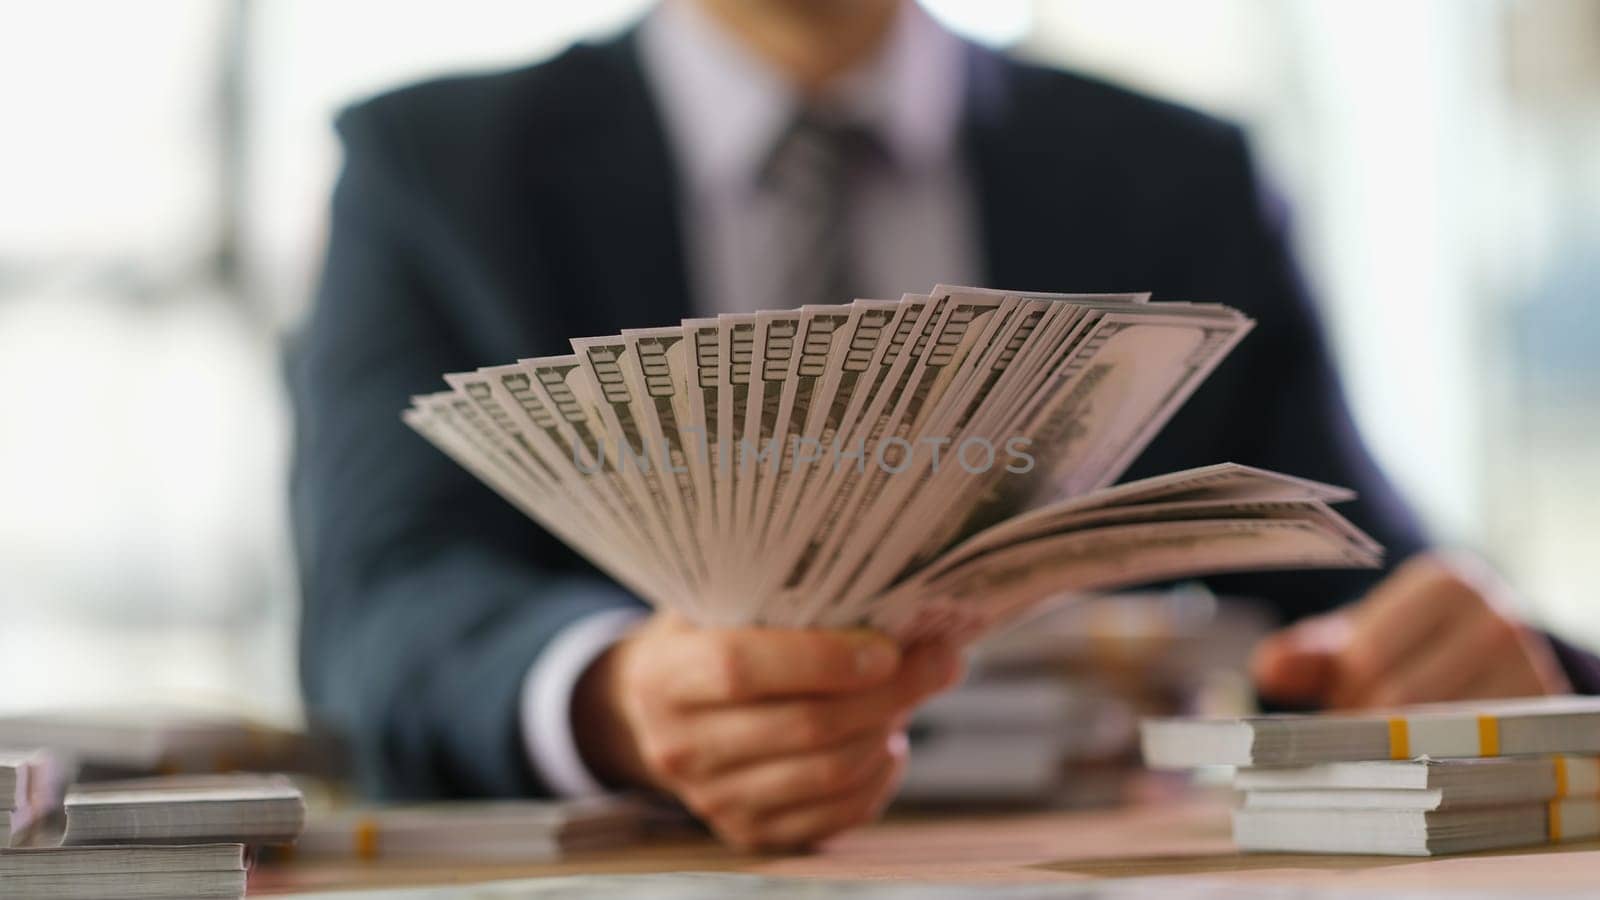 Businessman banker holding fan of dollar bills in hand closeup. High earnings in business concept